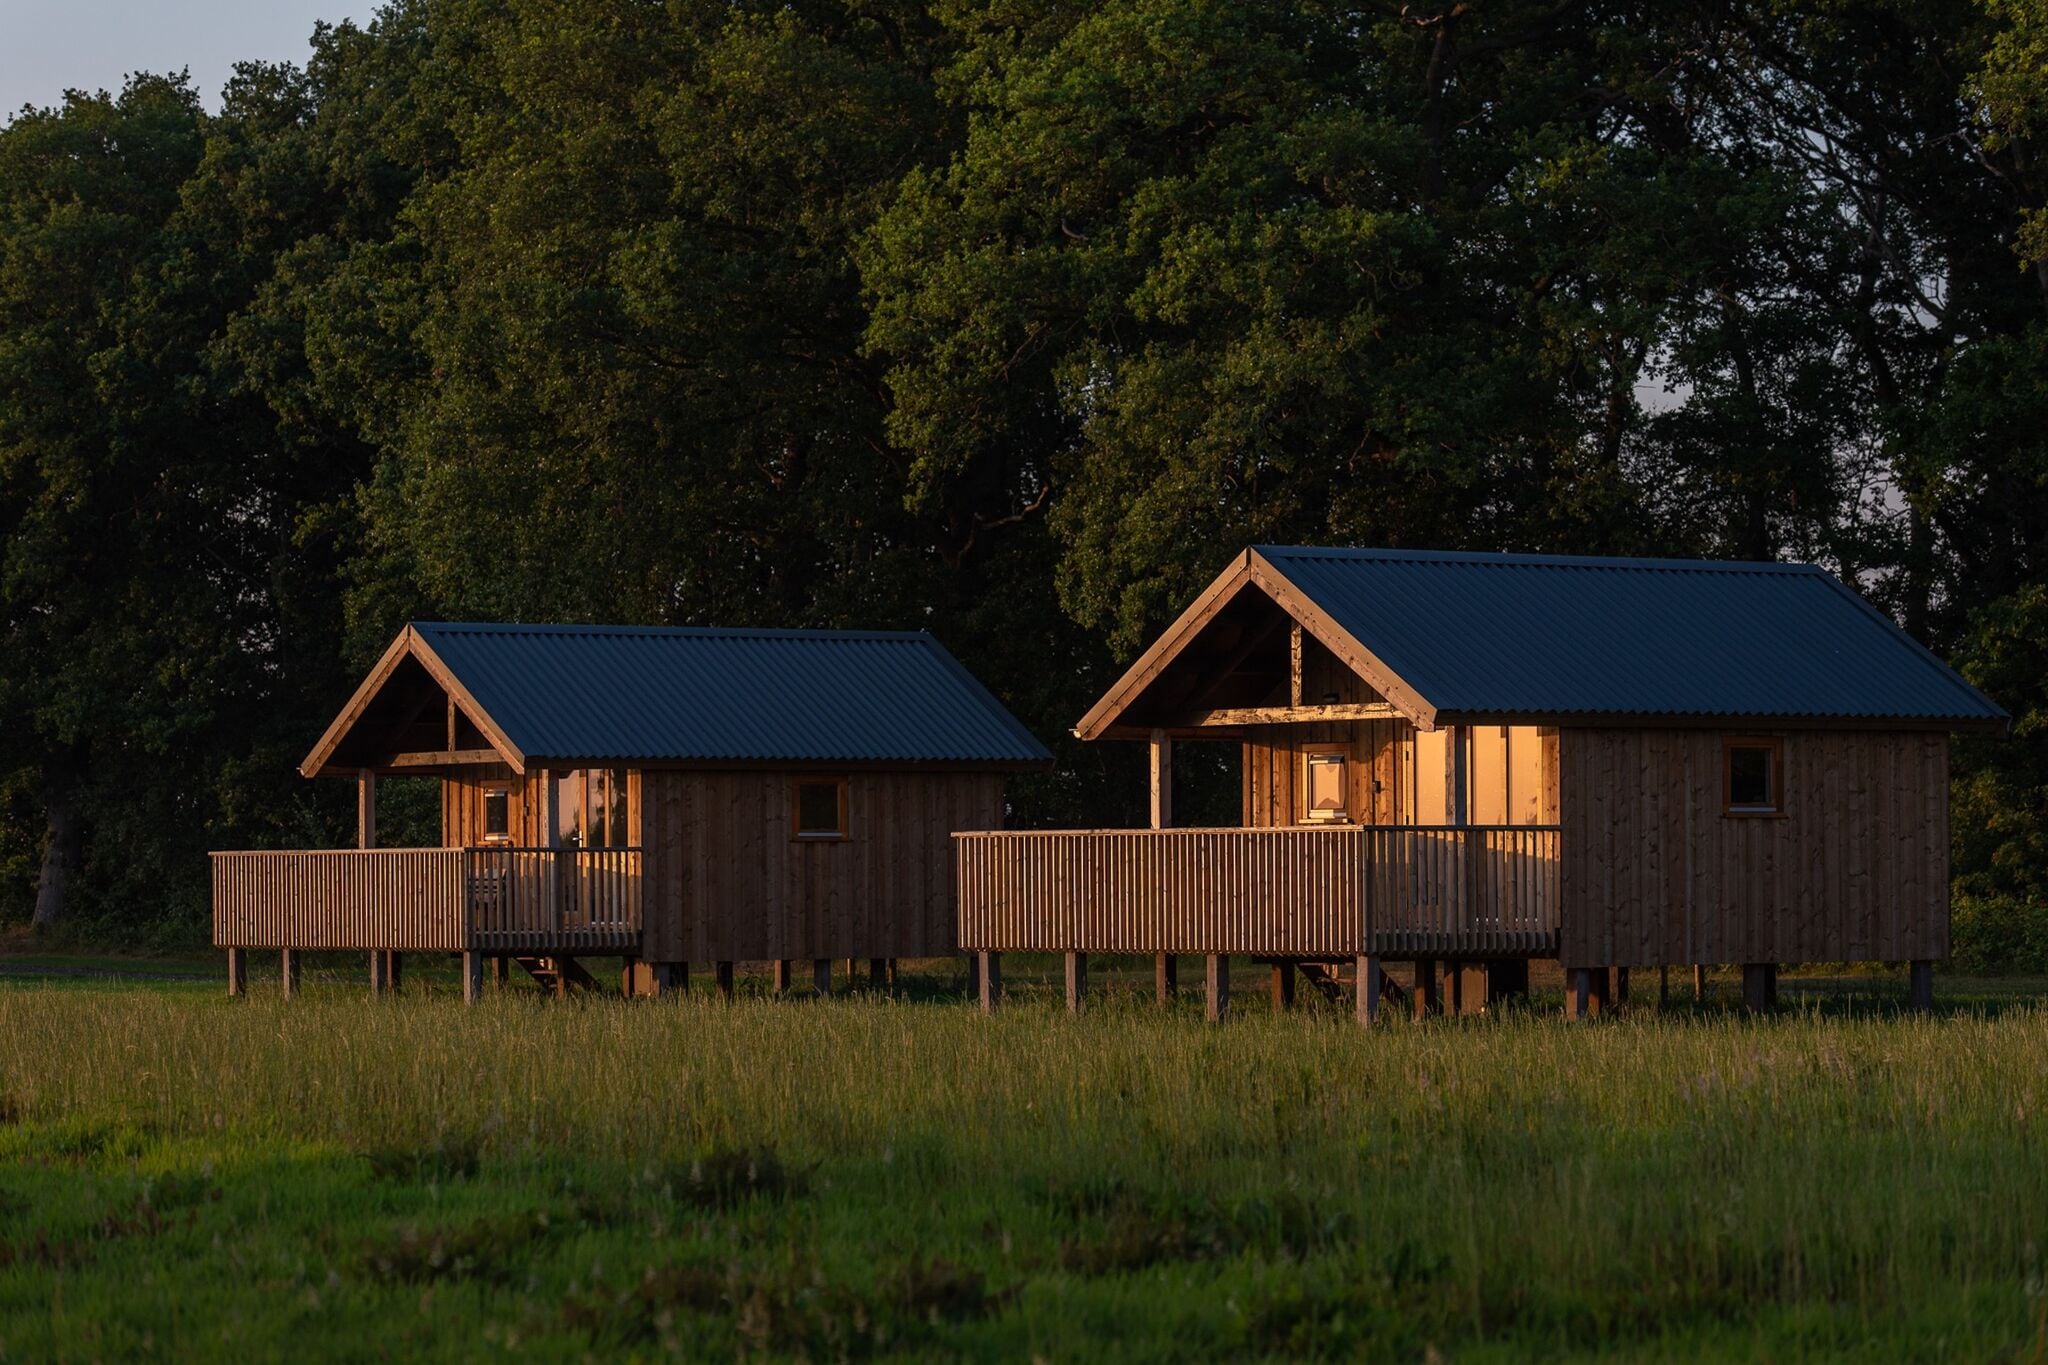 Composite lodges with shared space in Drenthe